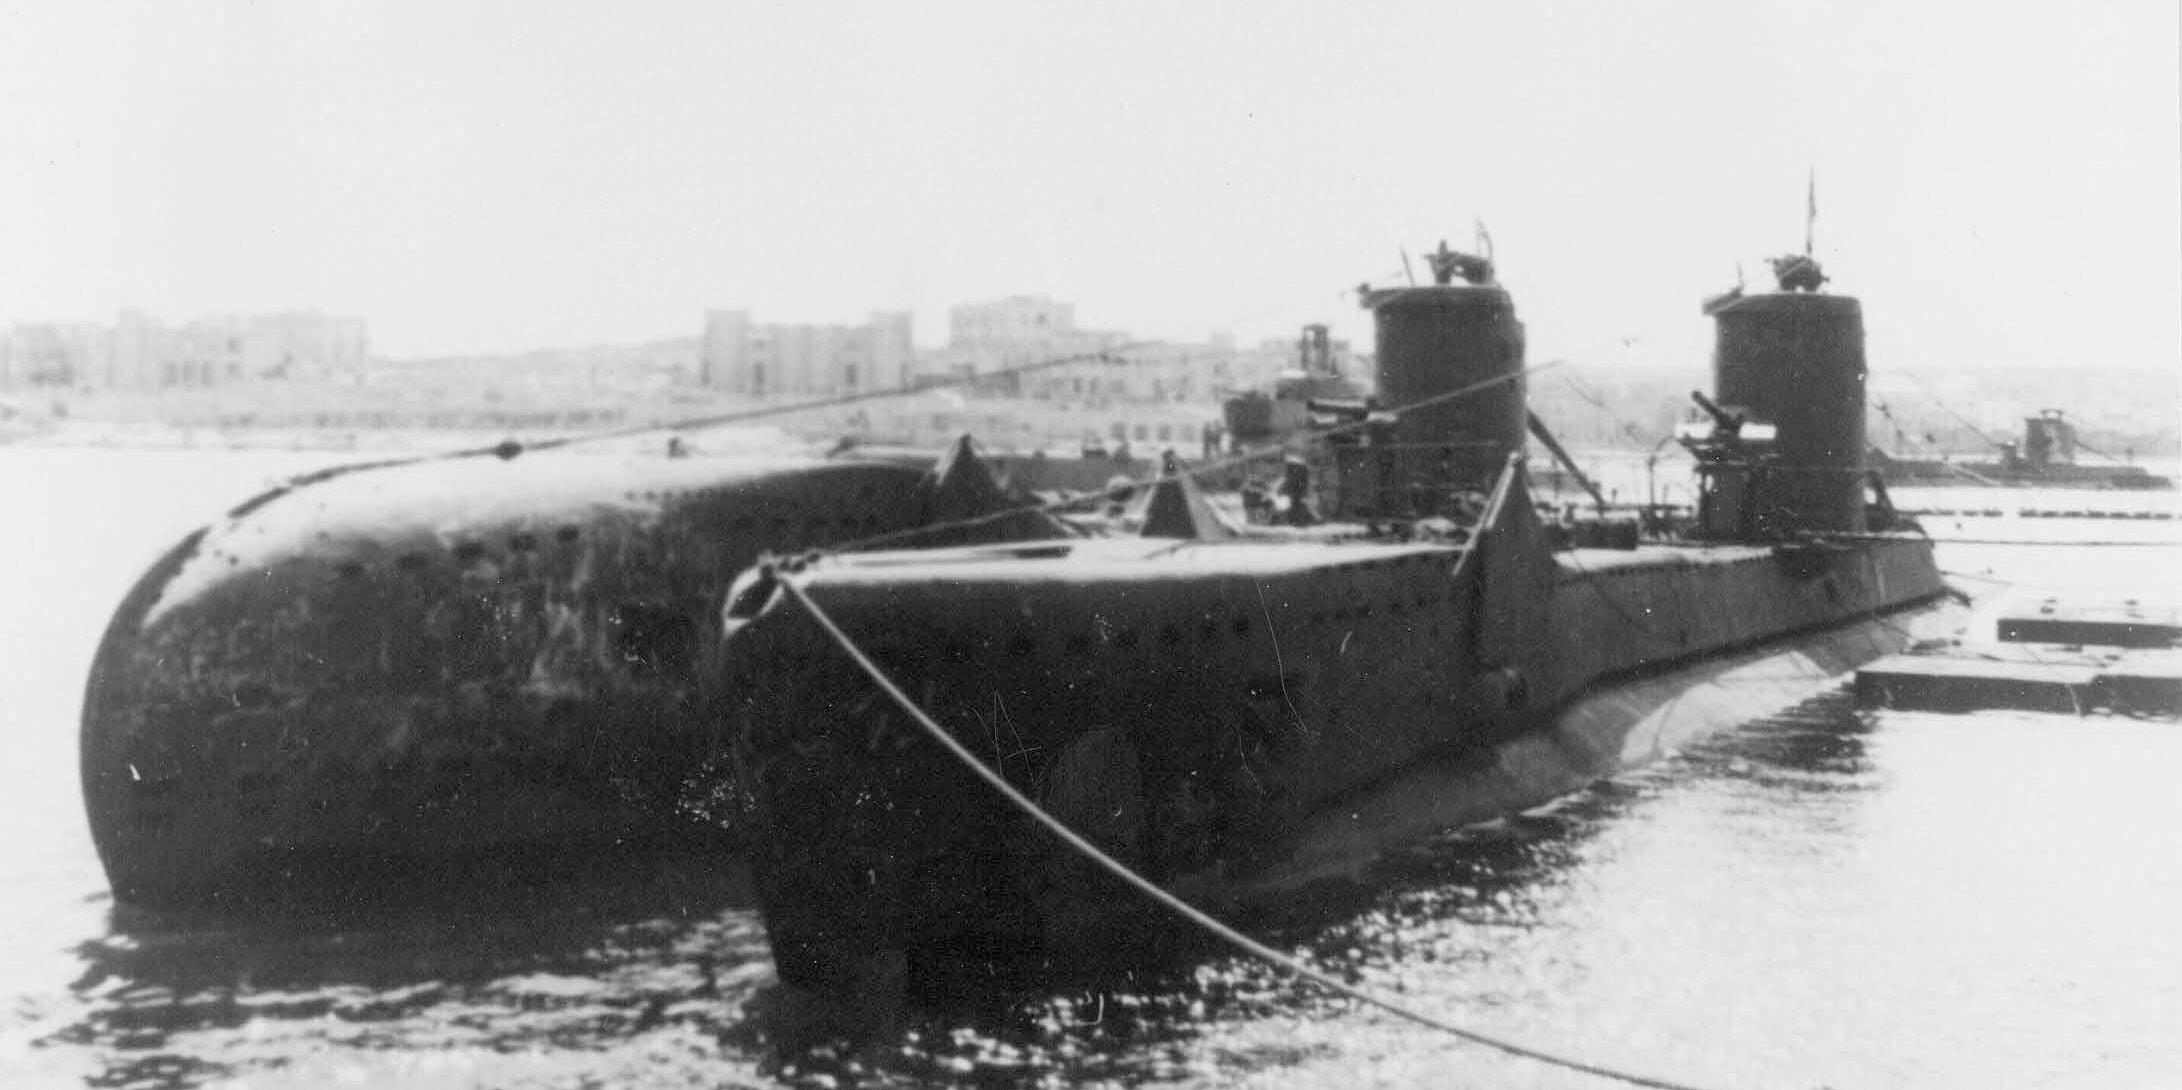 Tenth in the line of British-built U-class submarines, HMS Upholder is seen riding outboard of HMS Urge at Lazaretto. In one of only two authenticated photos of Upholder, the submarine's high bow is prominent compared to the flush bow of HMS Urge.